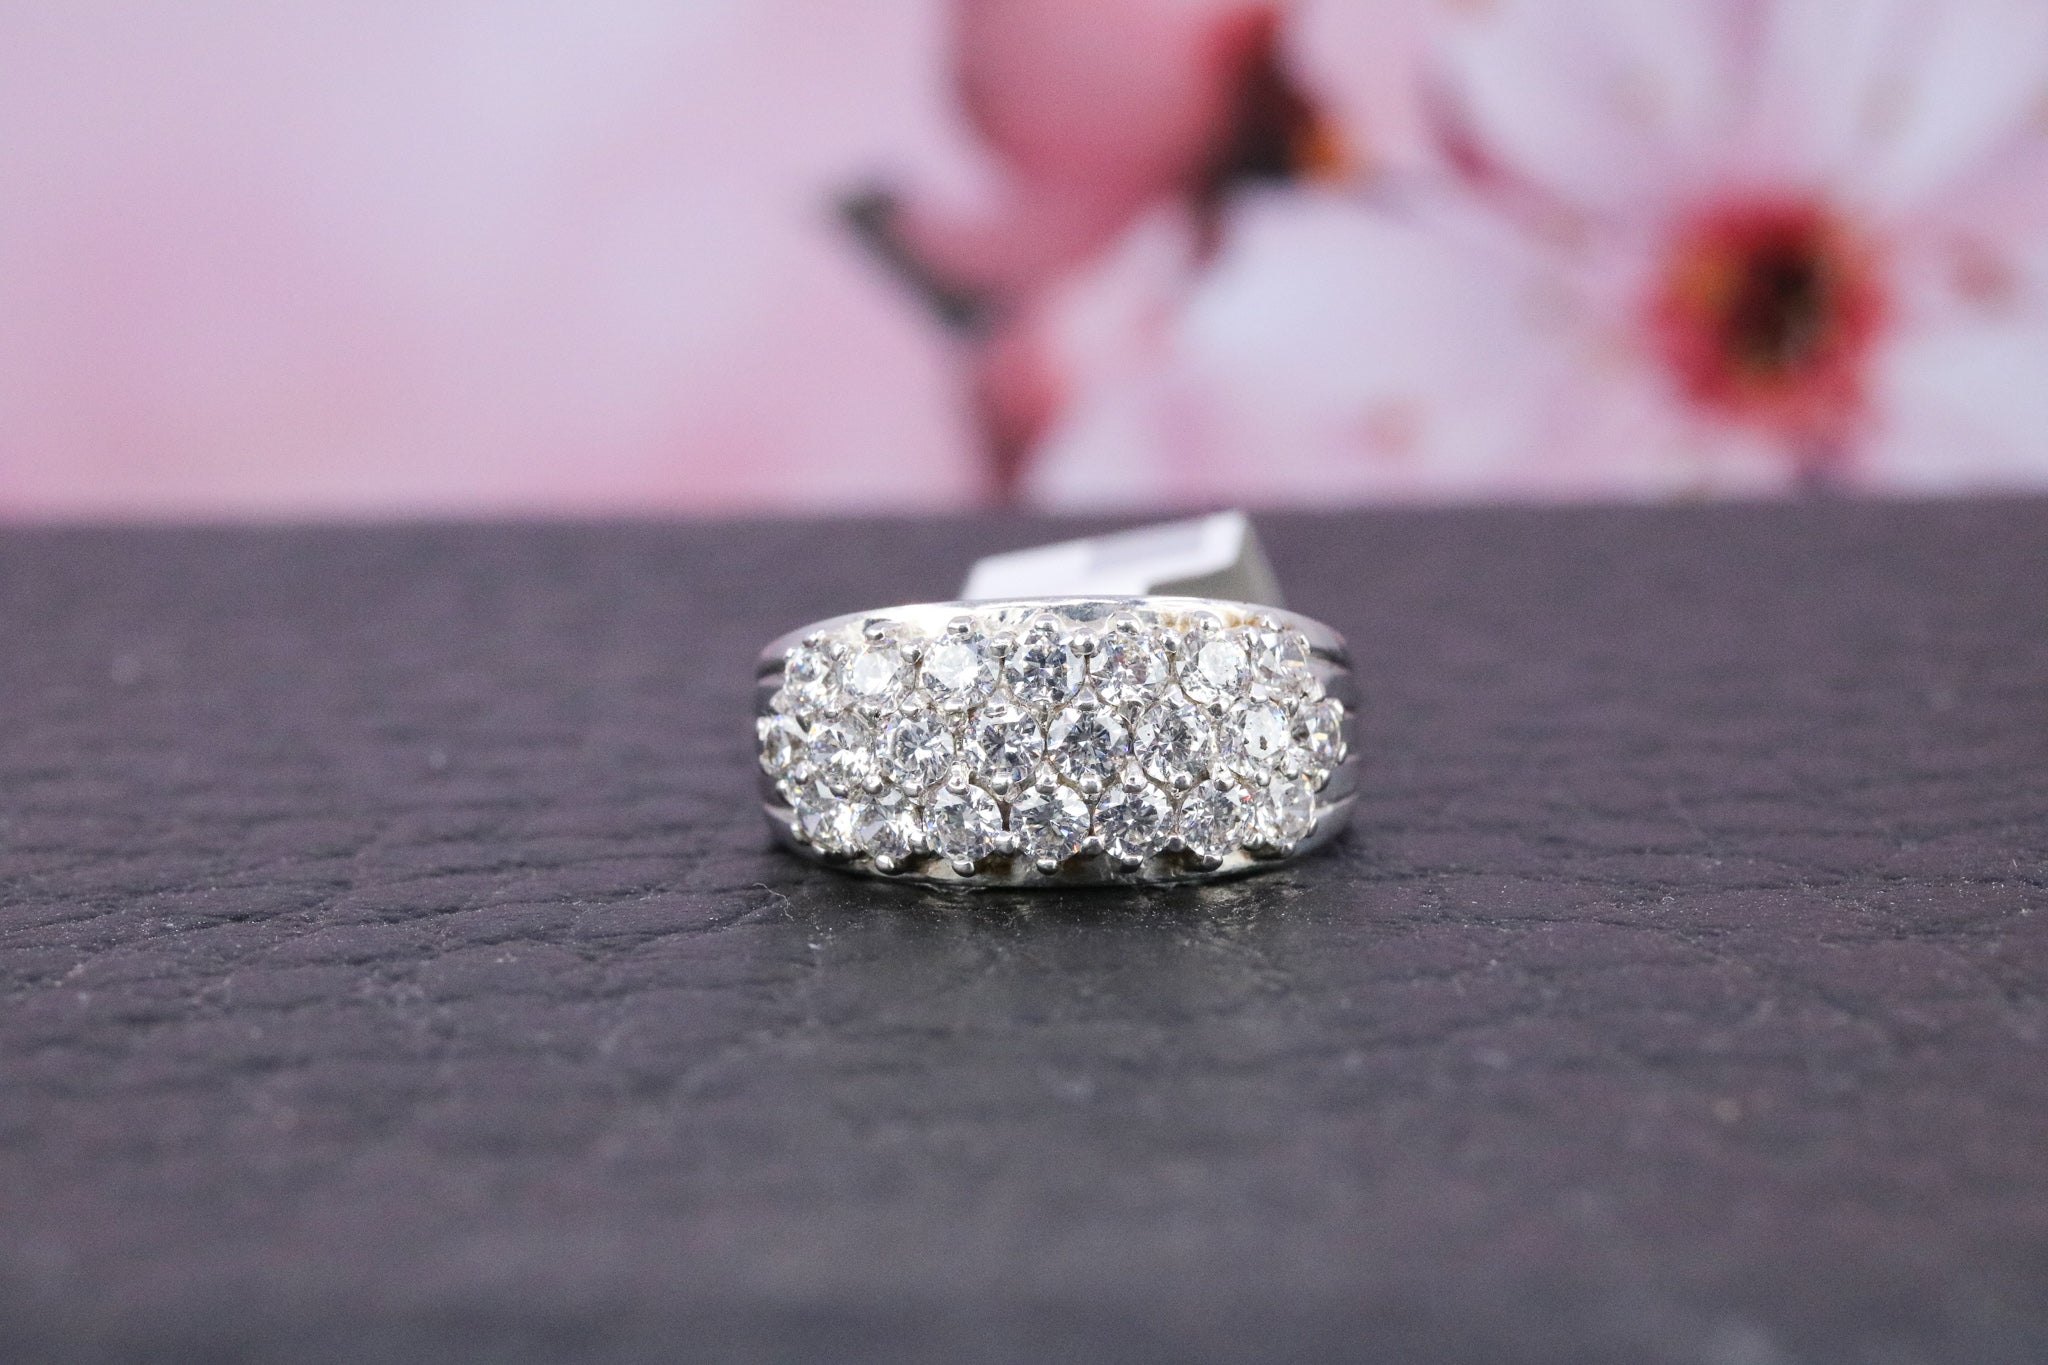 9ct White Gold Ring - CO1372 - Hallmark Jewellers Formby & The Jewellers Bench Widnes